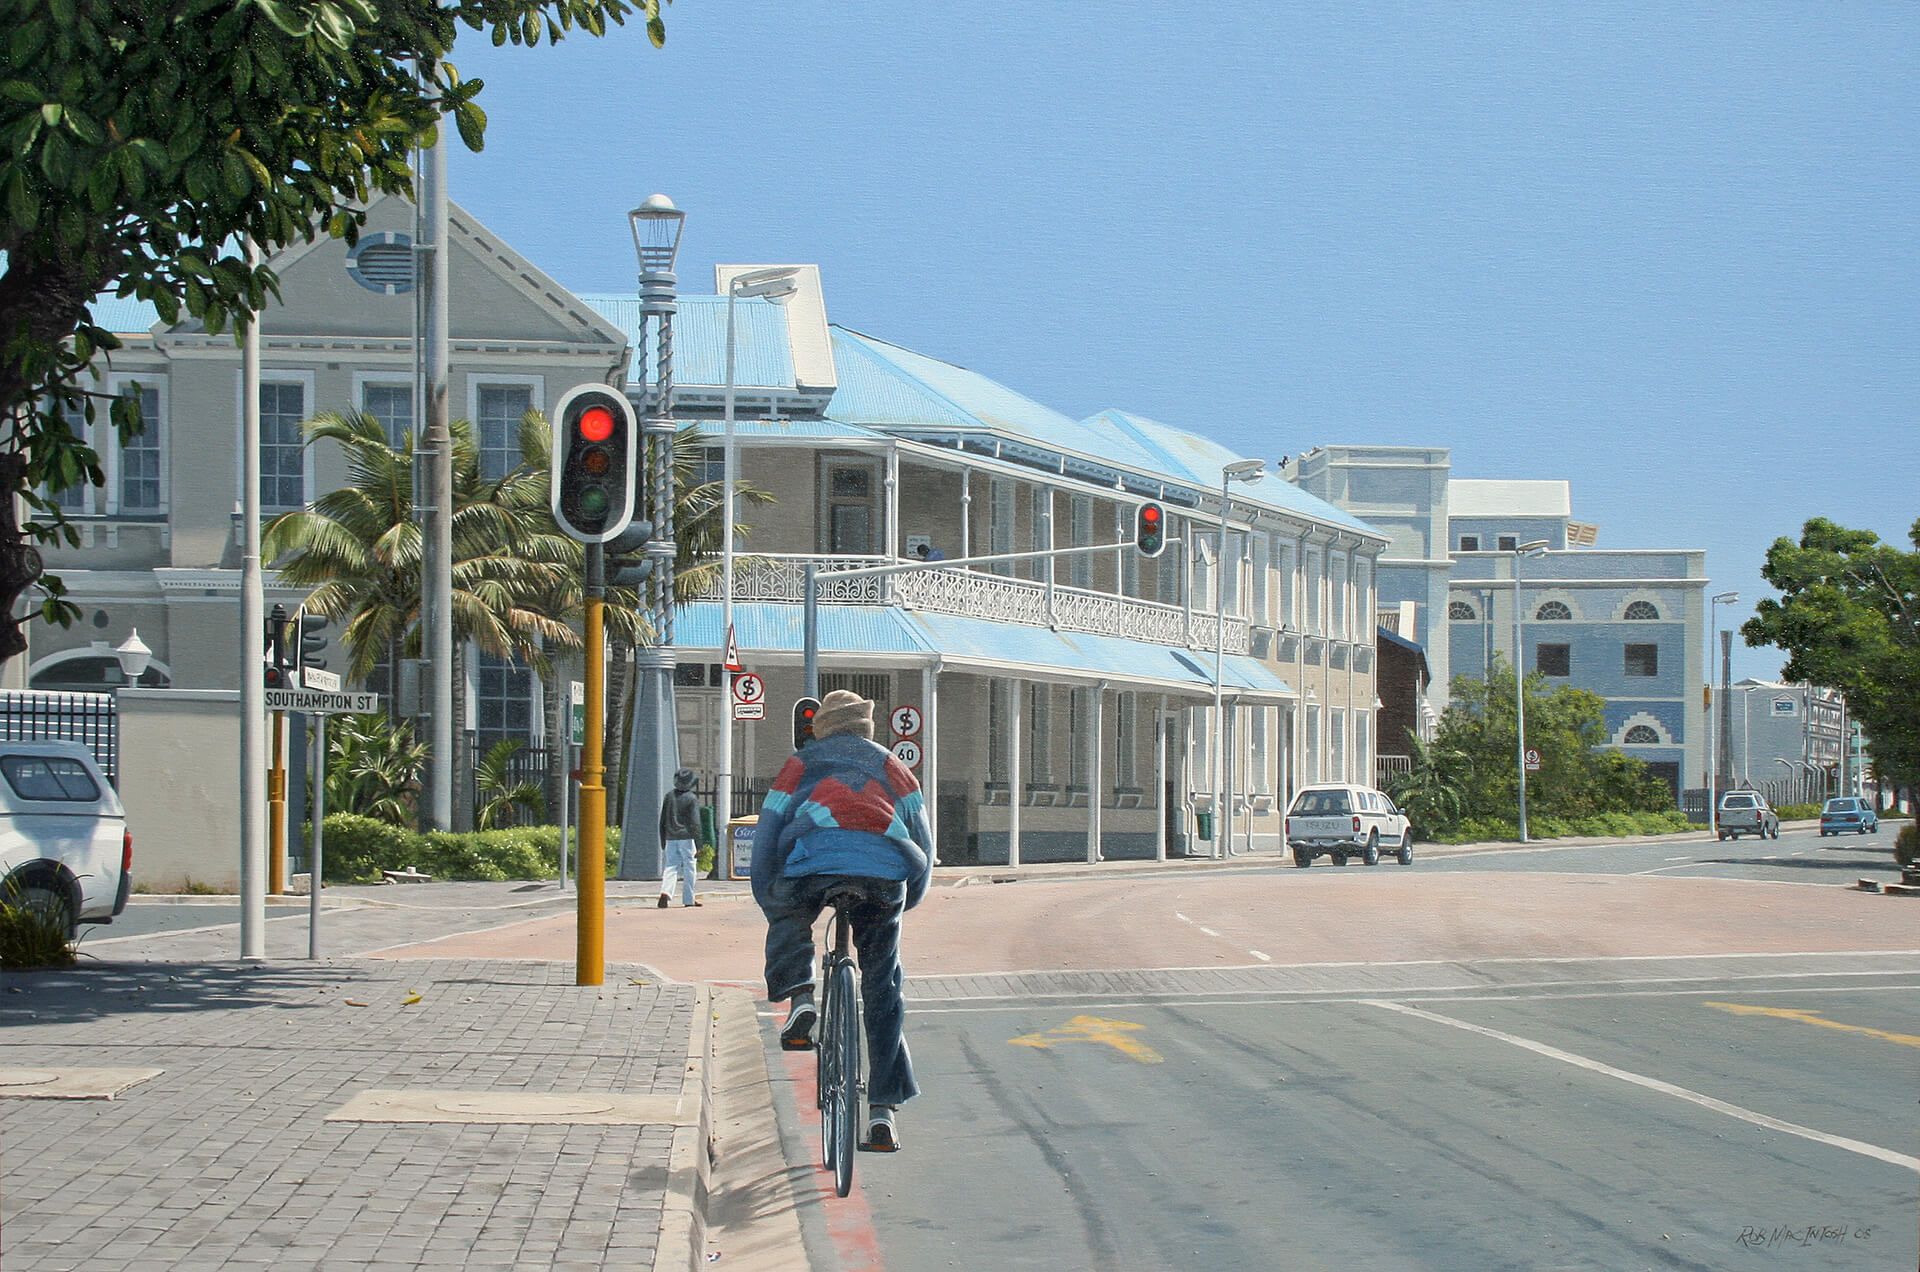 Photorealistic painting of a man cycling through a city street